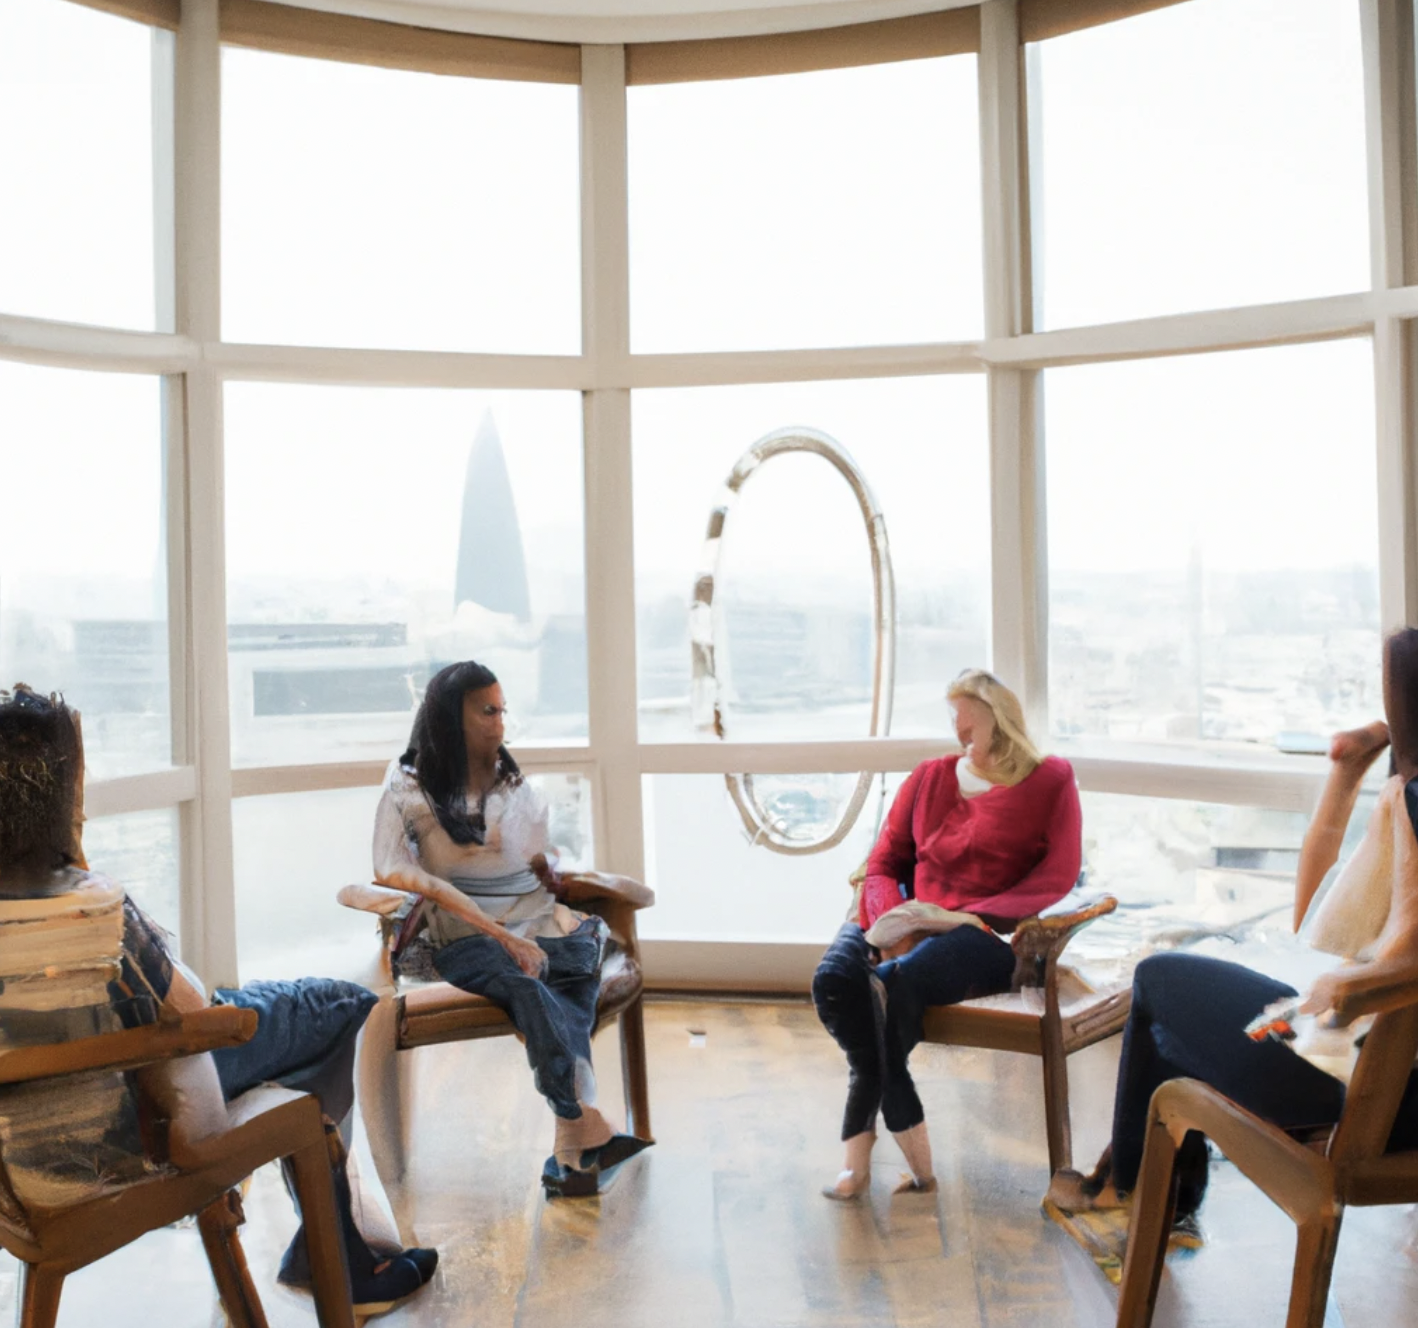 Inclusive and supportive group DBT therapy session in a comfortable London setting, with diverse individuals engaging in conversation, symbolising the empathetic approach of our DBT therapists near you. The London eye landmark can be seen through the large window.